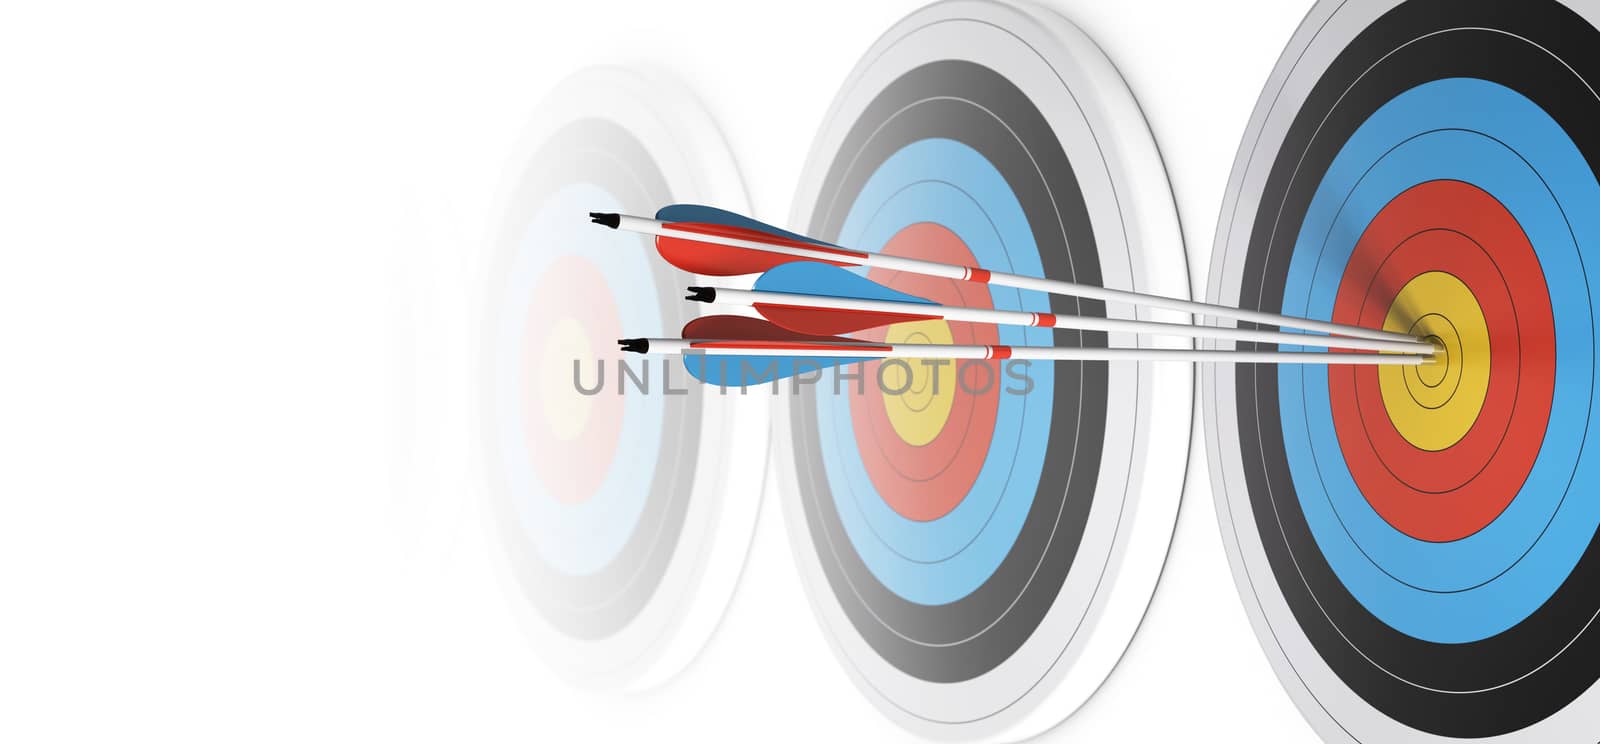 Many targets in a row, three arrows hits the first one in the center, over white, image fading to white at the background.